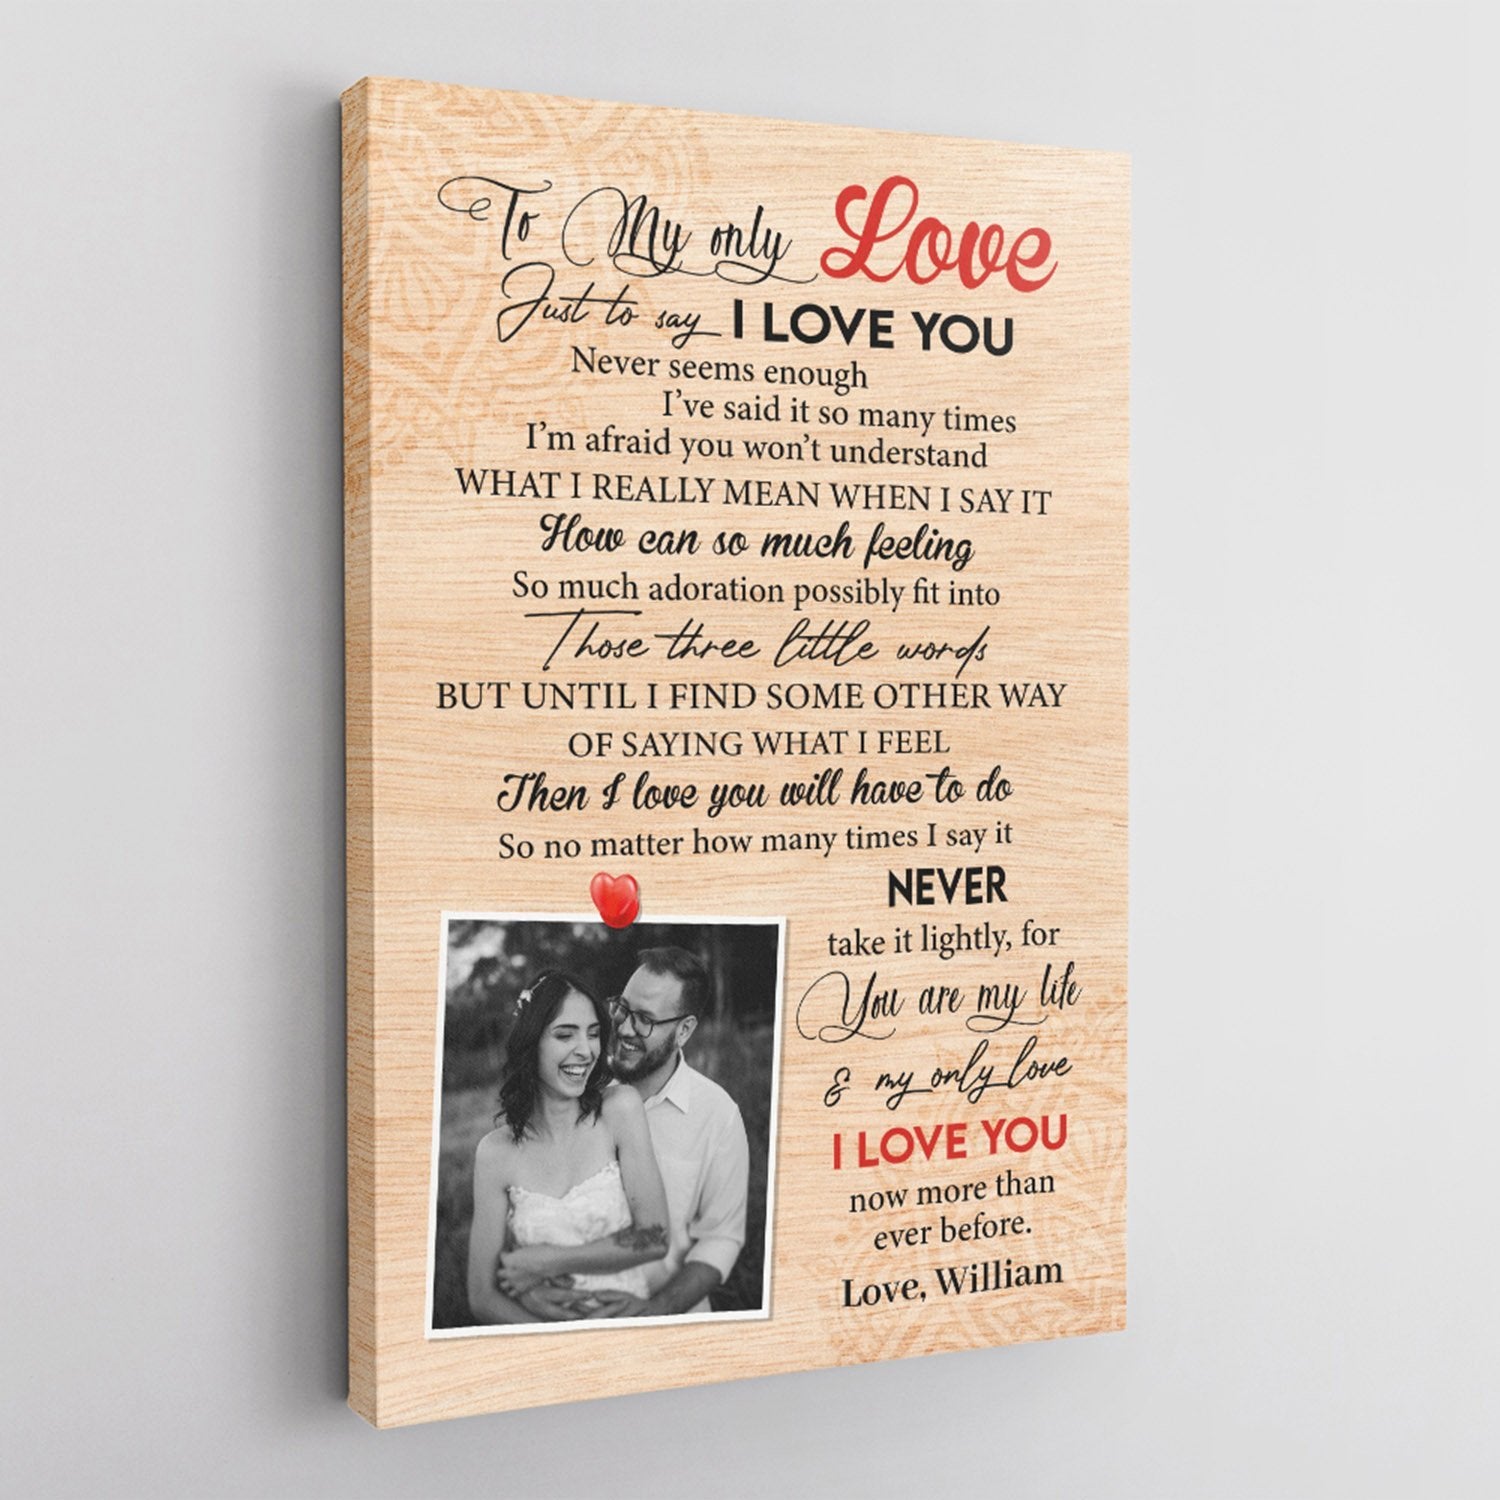 To My Only Love Just To Say I Love You, Custom Photo Canvas Art Print